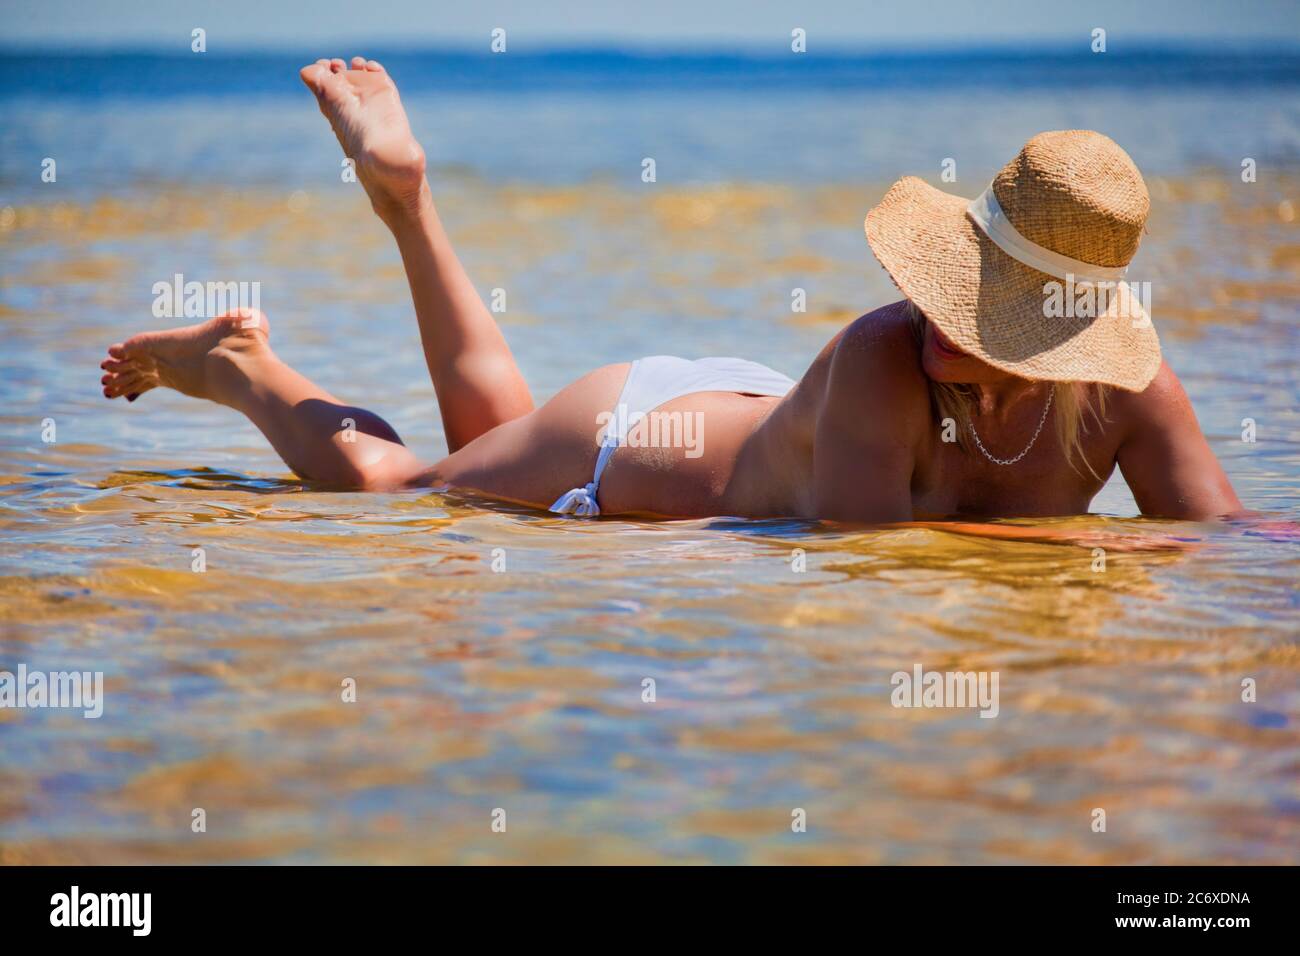 Topless woman lying on her stomach in the water with a big sunhat on Stock Photo